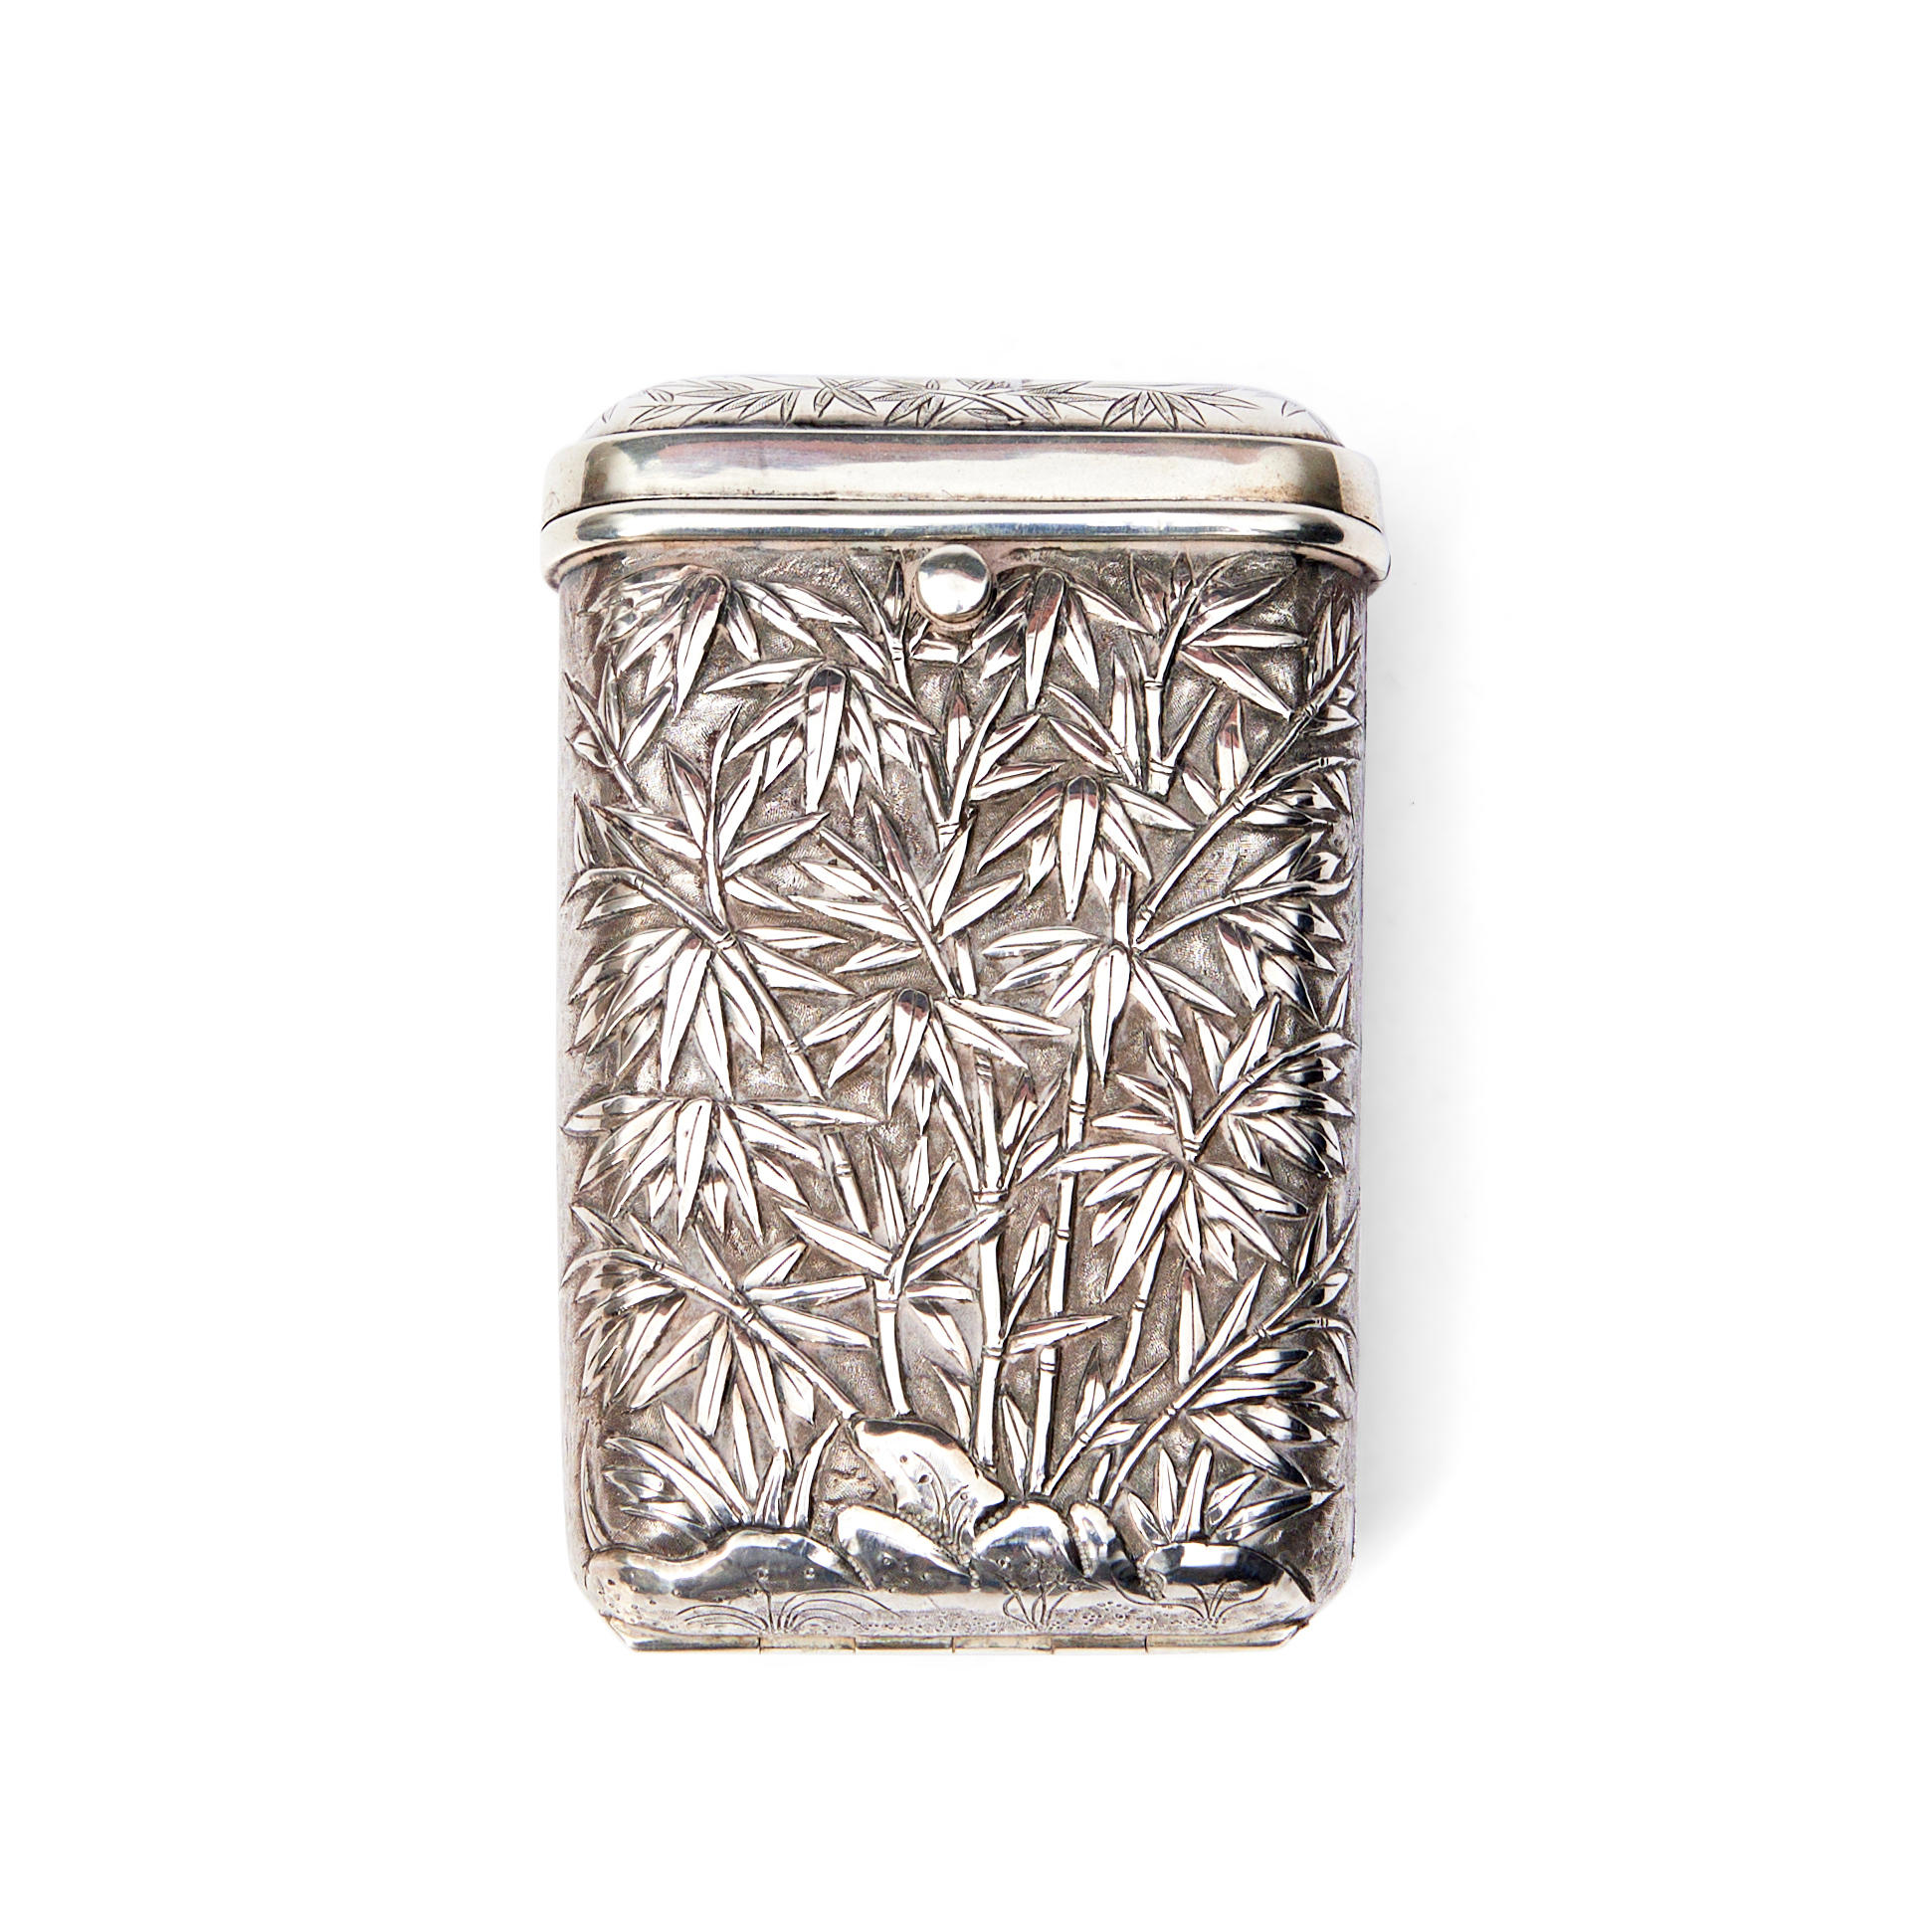 CHINESE EXPORT SILVER CHEROOT CASE,